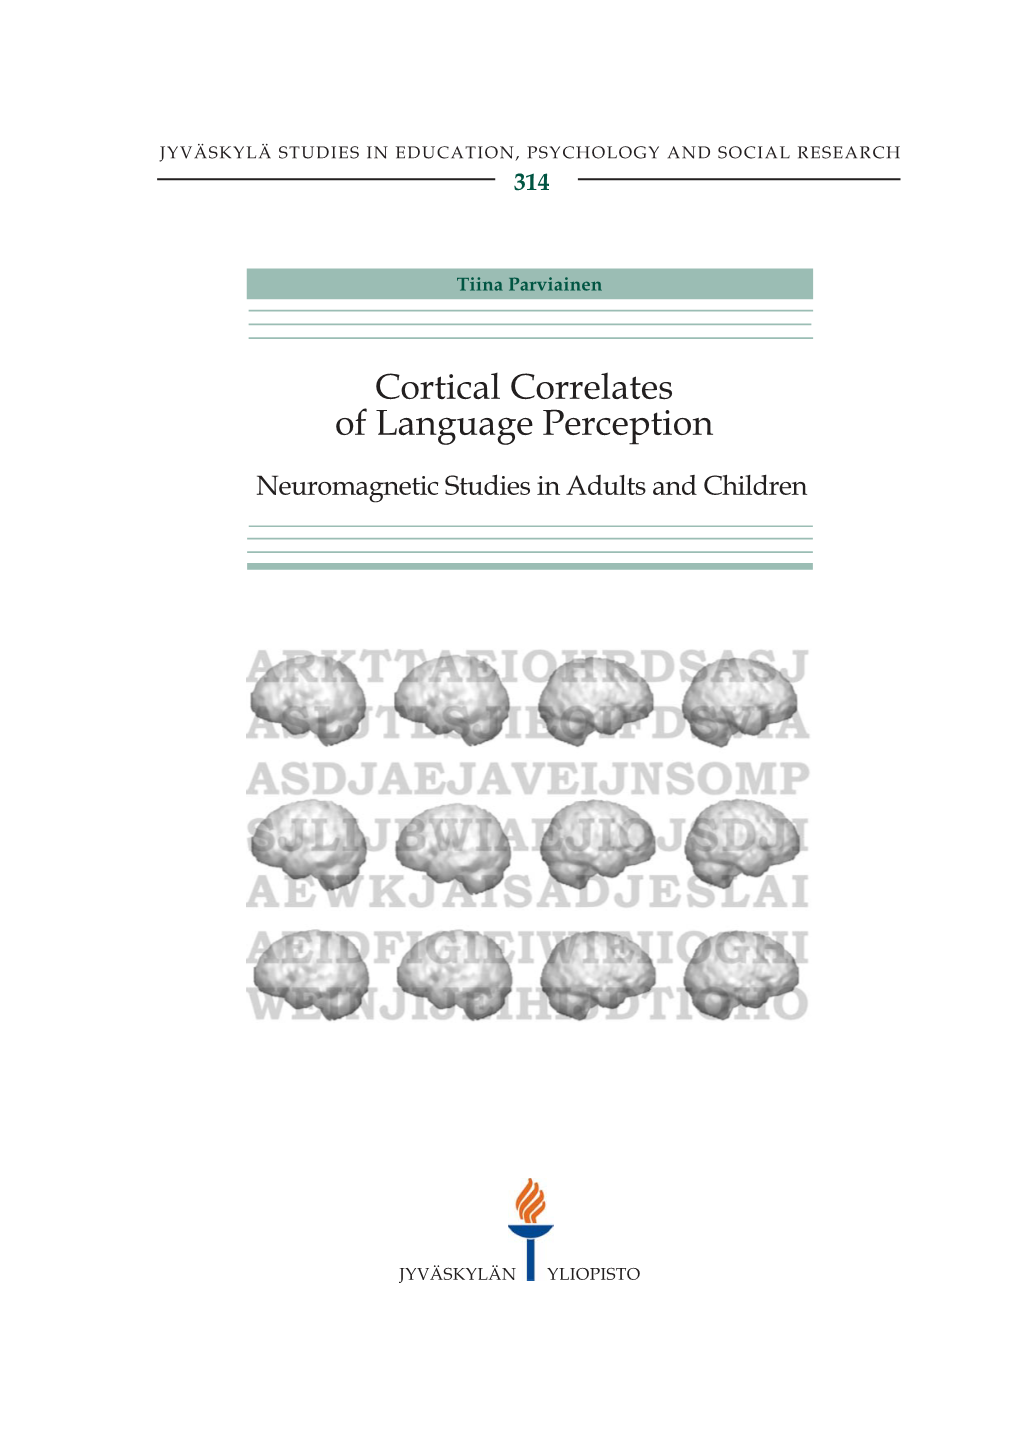 Cortical Correlates of Language Perception. Neuromagnetic Studies in Adults and Children